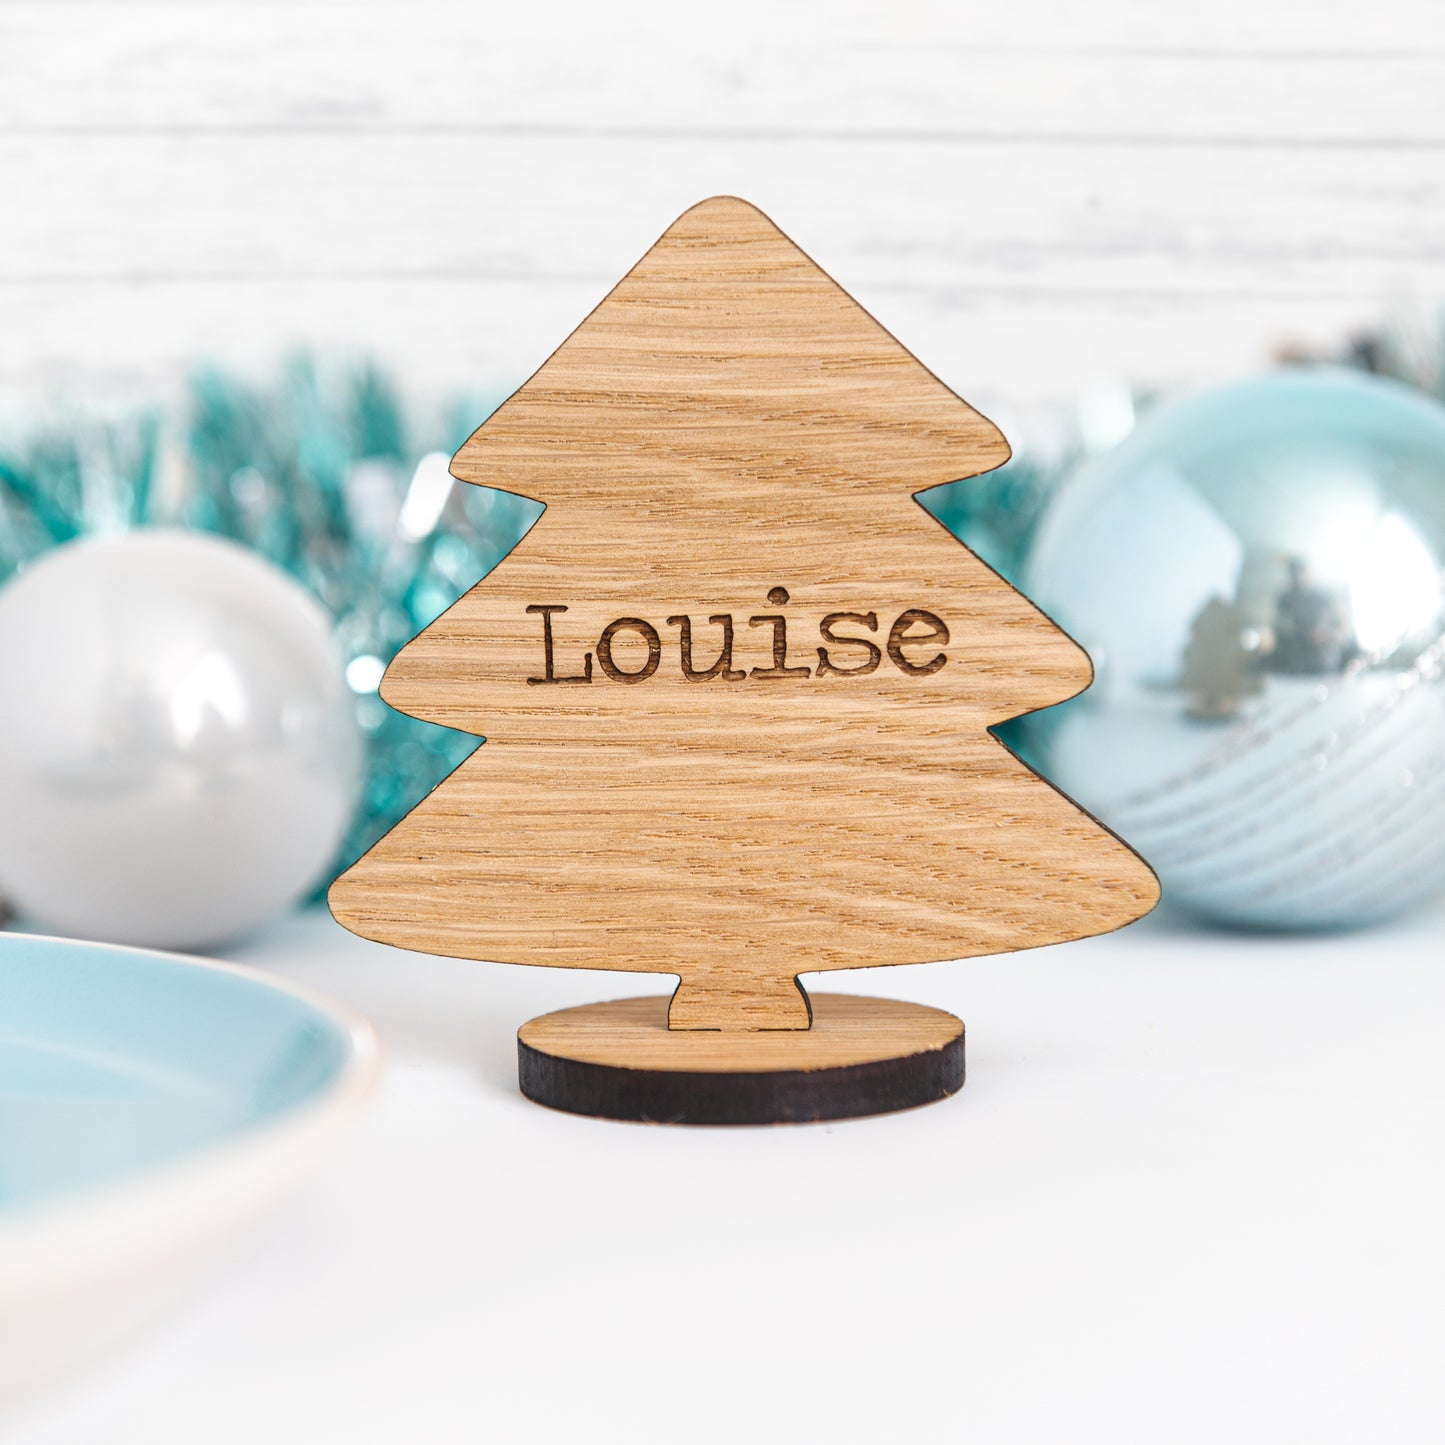 Personalised Christmas Tree Place Names For The Christmas Table